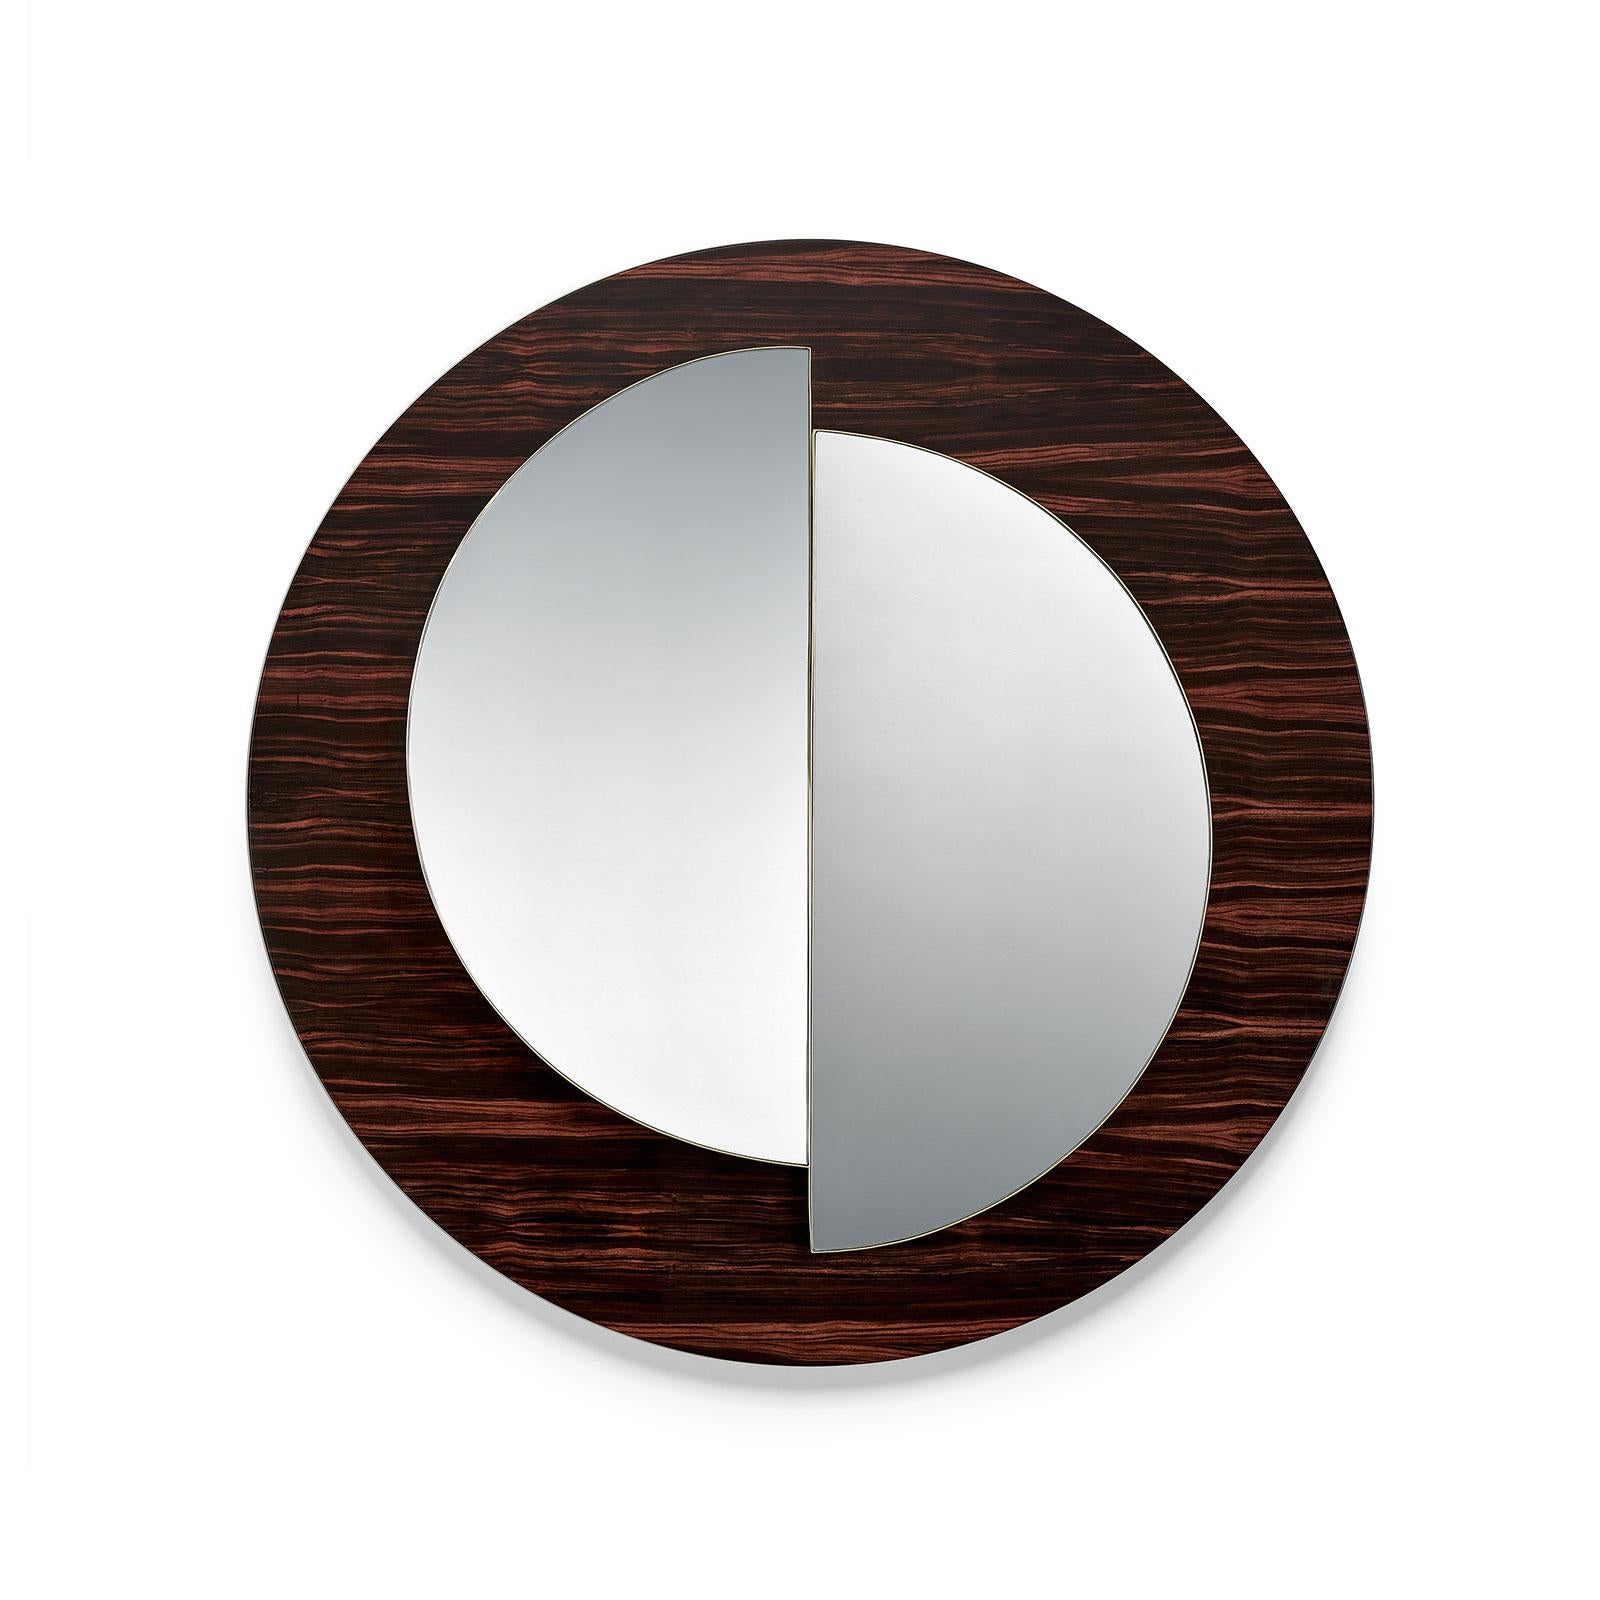 The divided mirrors provide two different reflections, in two different perspectives, as that of night and day, dark and light, the sky and the land.
Frame: Bird Eye, Artic Bird Eye, American Walnut, Ebony or Olive Ash wood veneer with matt or gloss